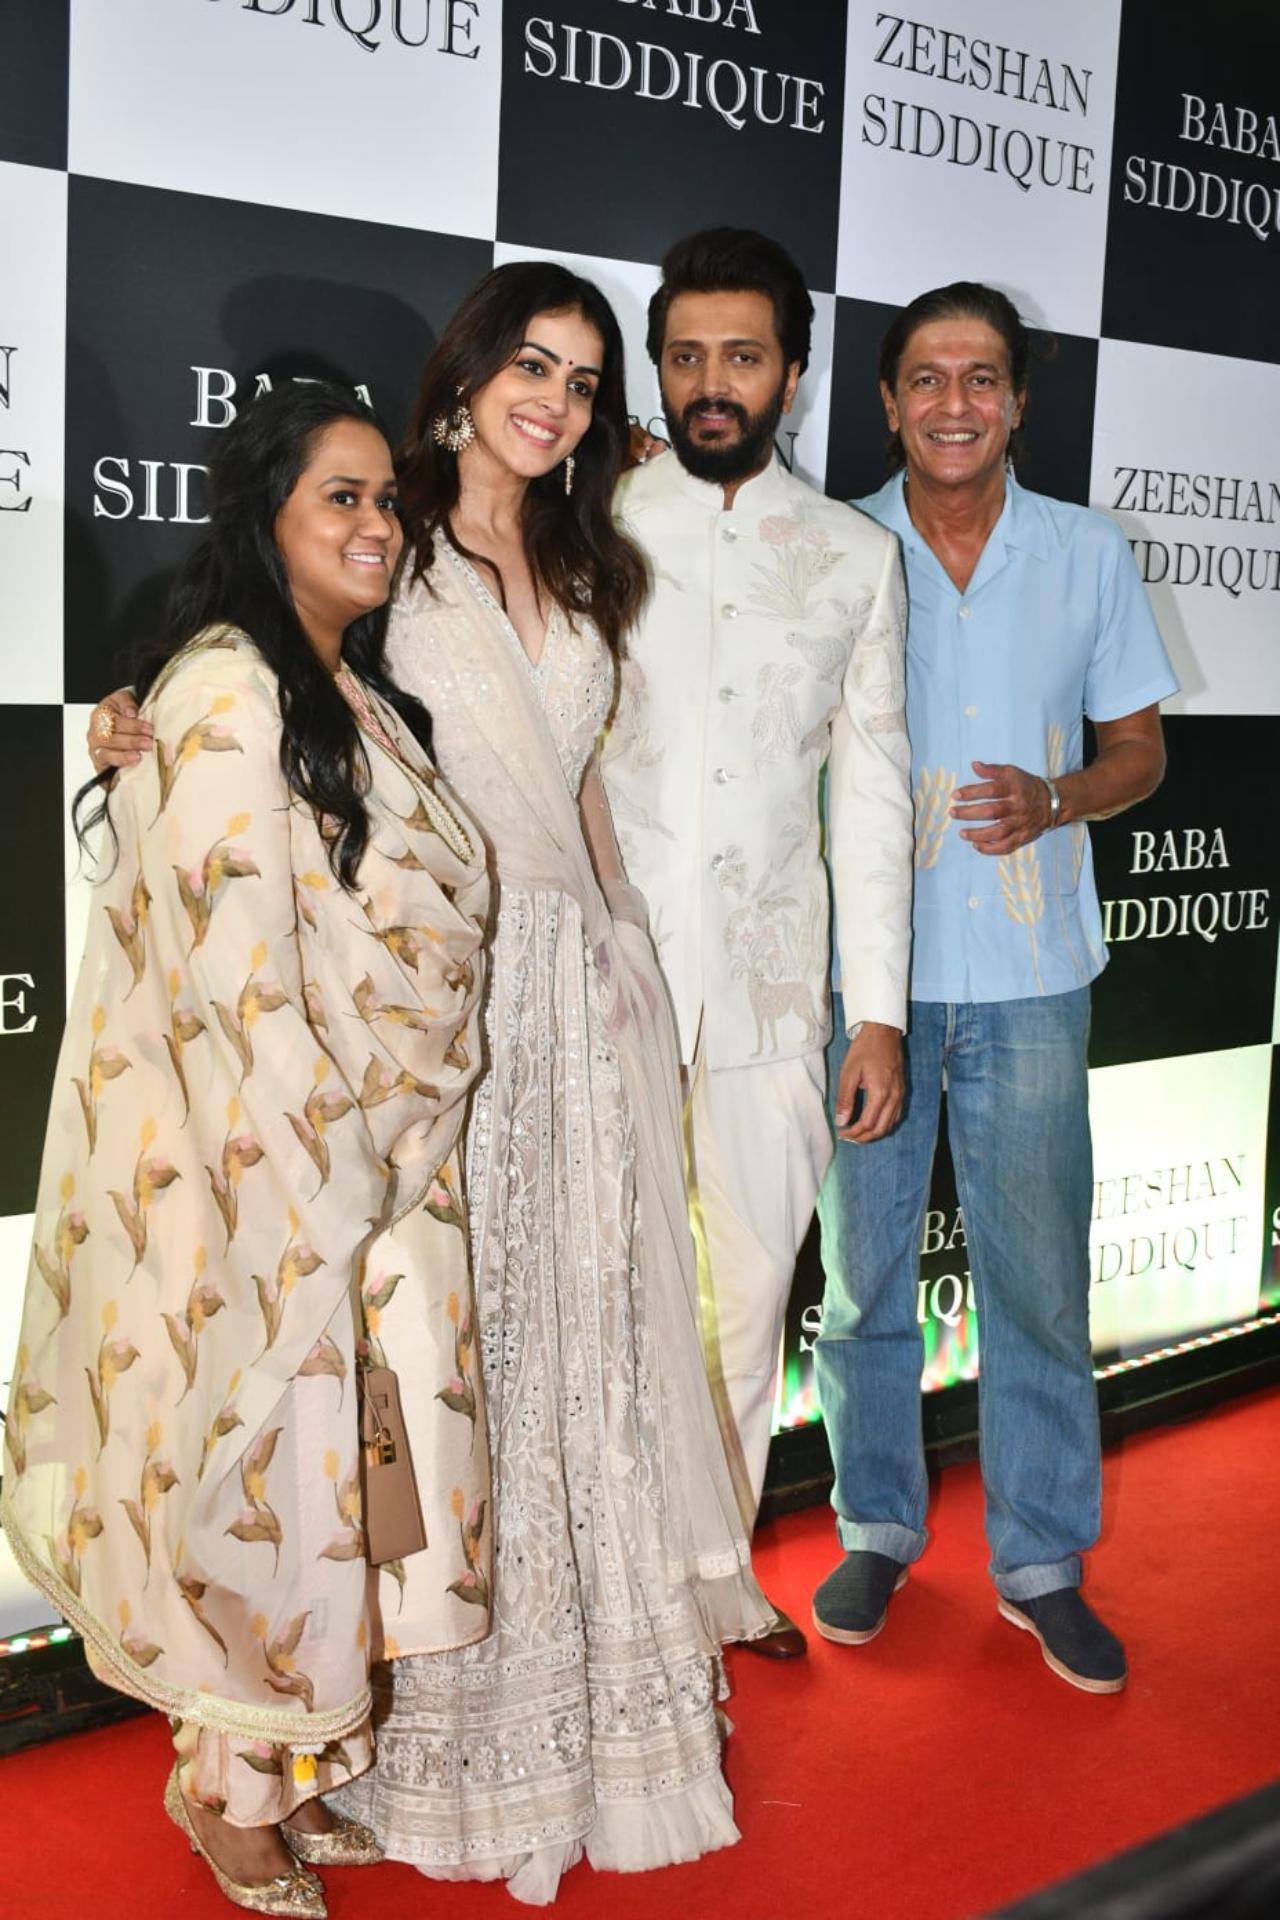 Apart from Salman-Salim, Arpita Khan and her husband Aayush Sharma came for the occasion. Arpita joined Riteish and Genelia Deshmukh and Chunky Panday for the photo-op